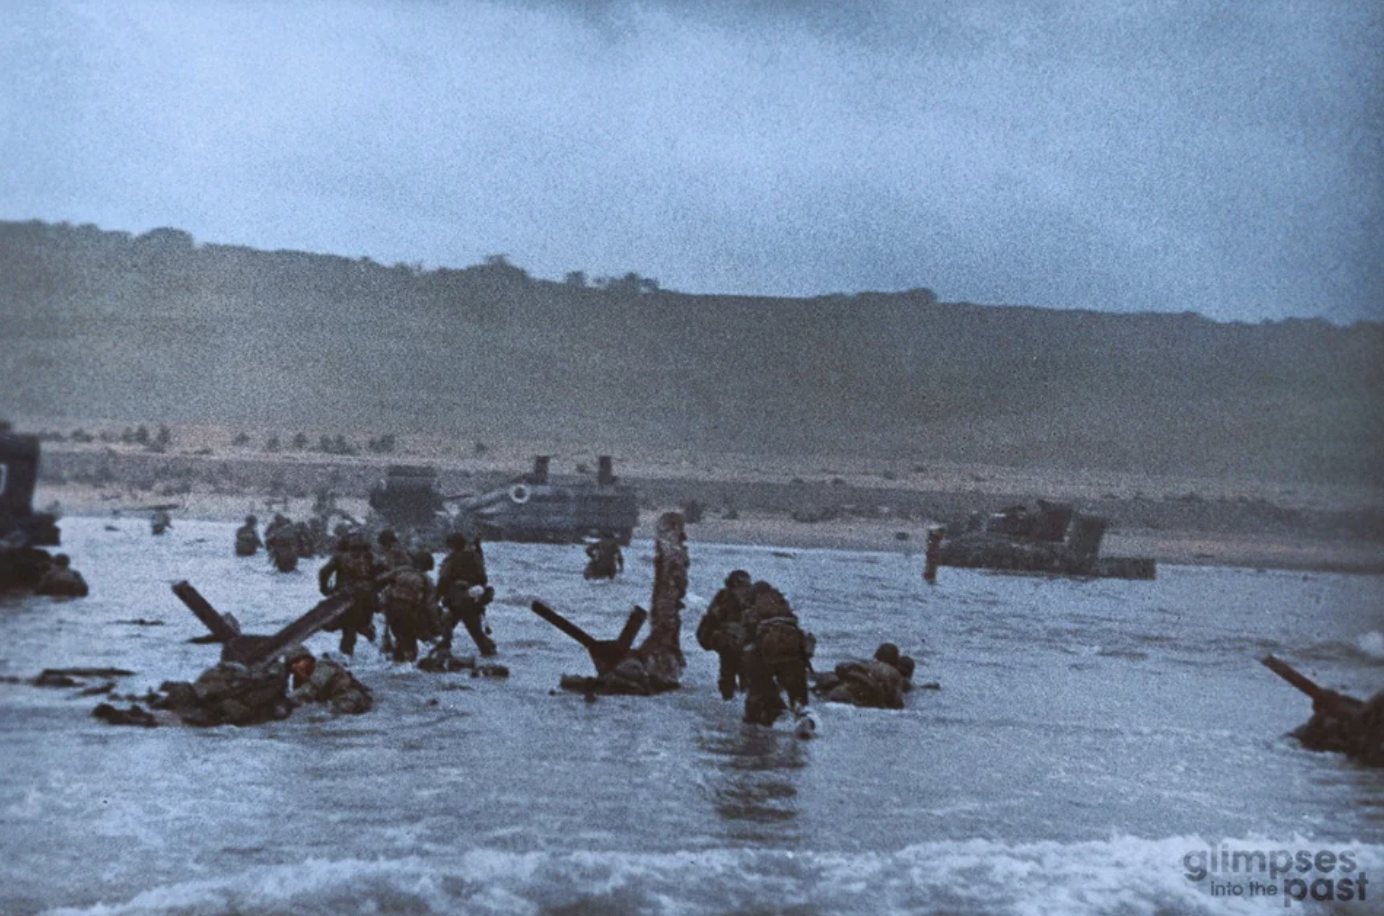 26 Pics of D-Day That Should Give Us All Pause